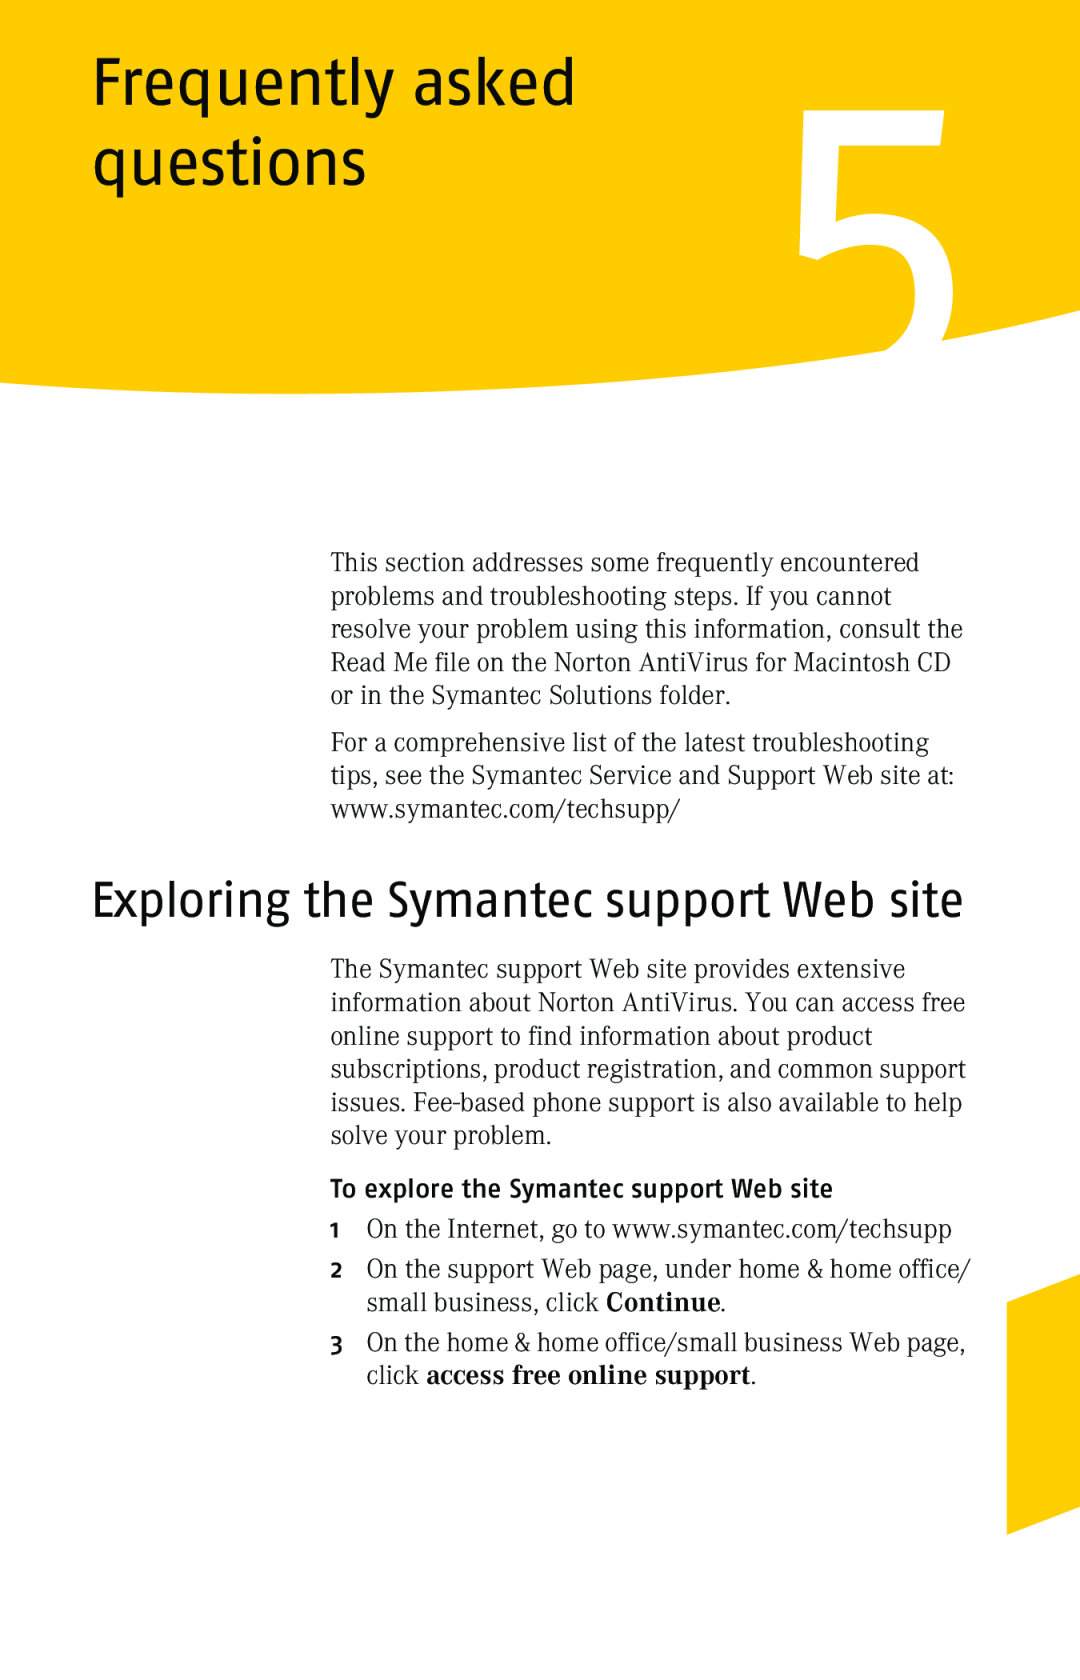 Symantec 10 manual Frequently asked, questions, Exploring the Symantec support Web site 